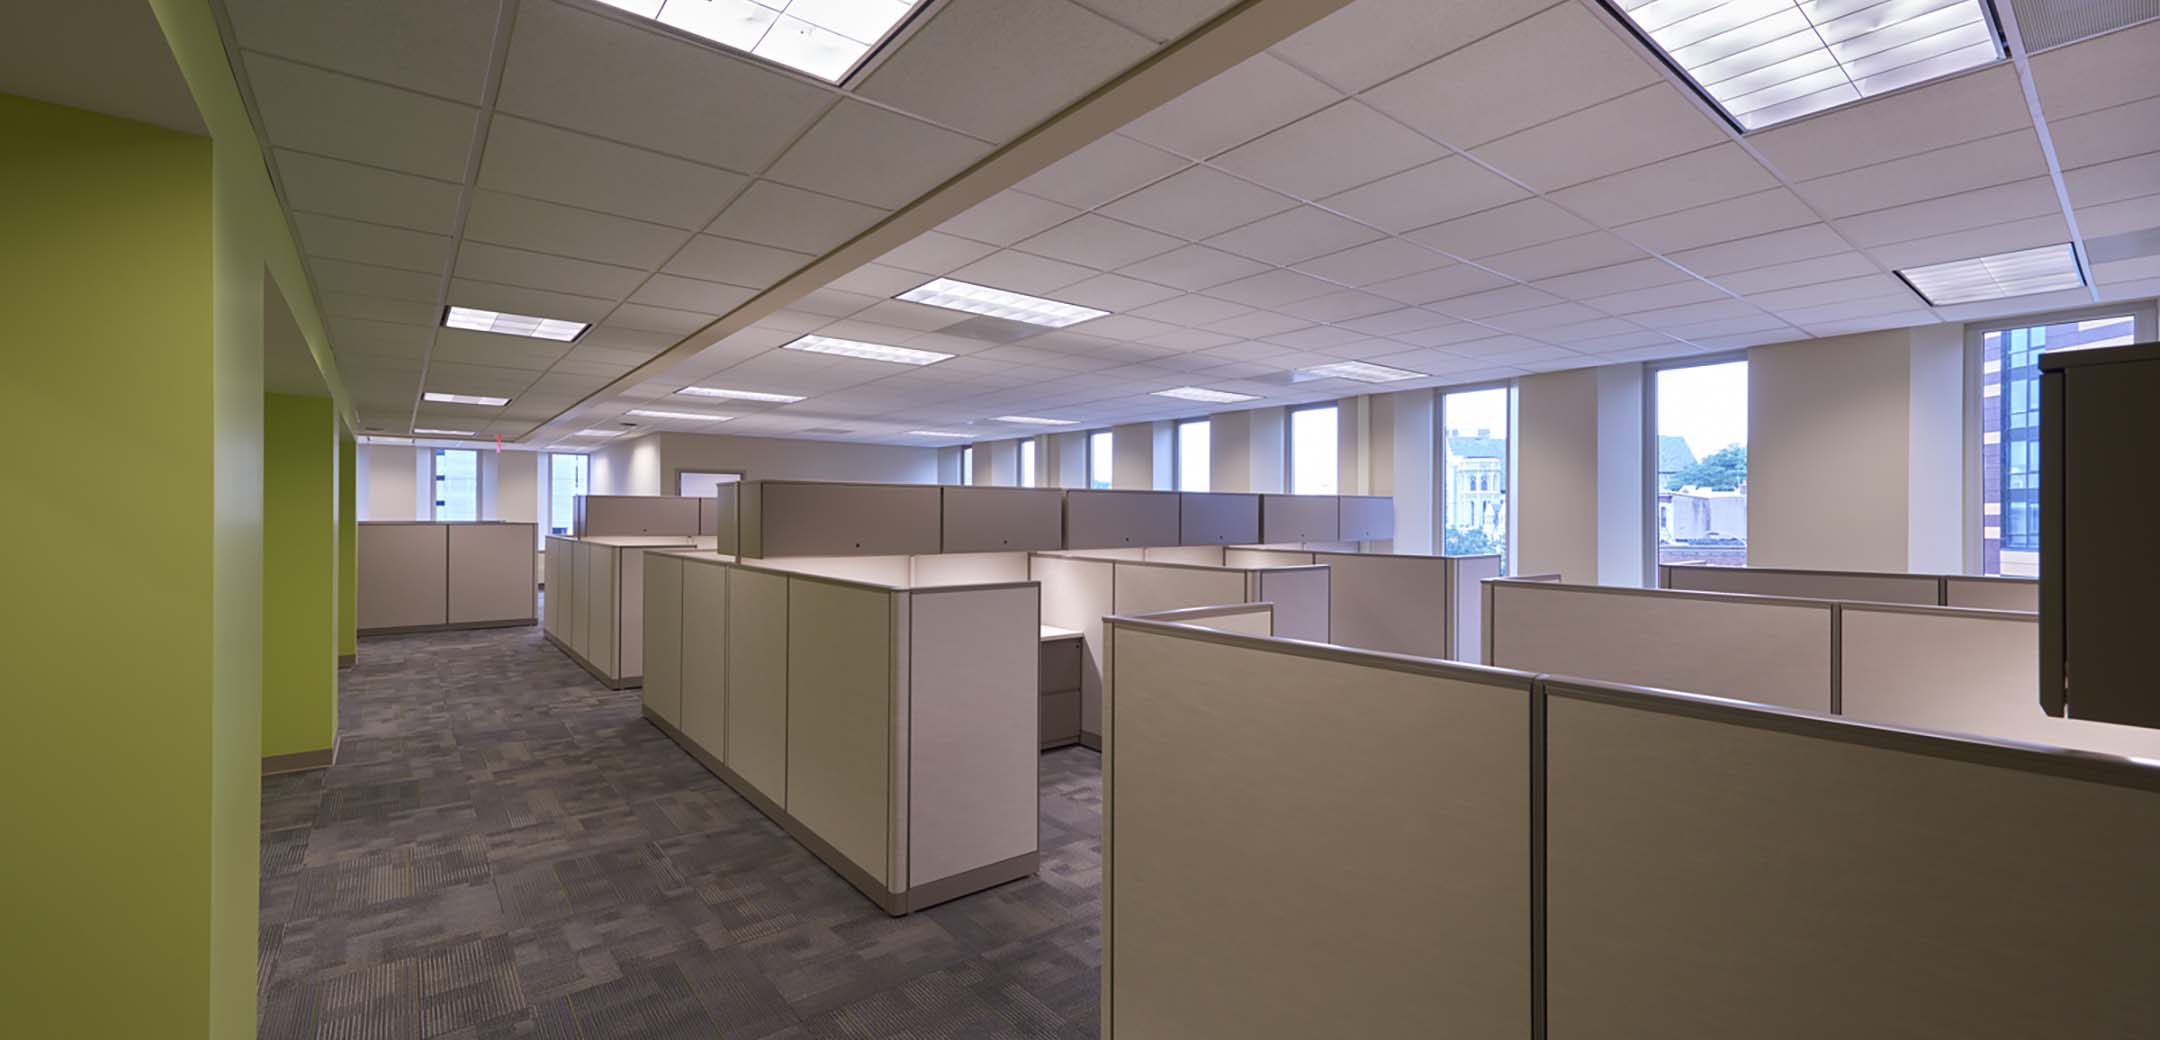 An interior view of the 3930 Chestnut building showcasing the office cubicles in the open space.